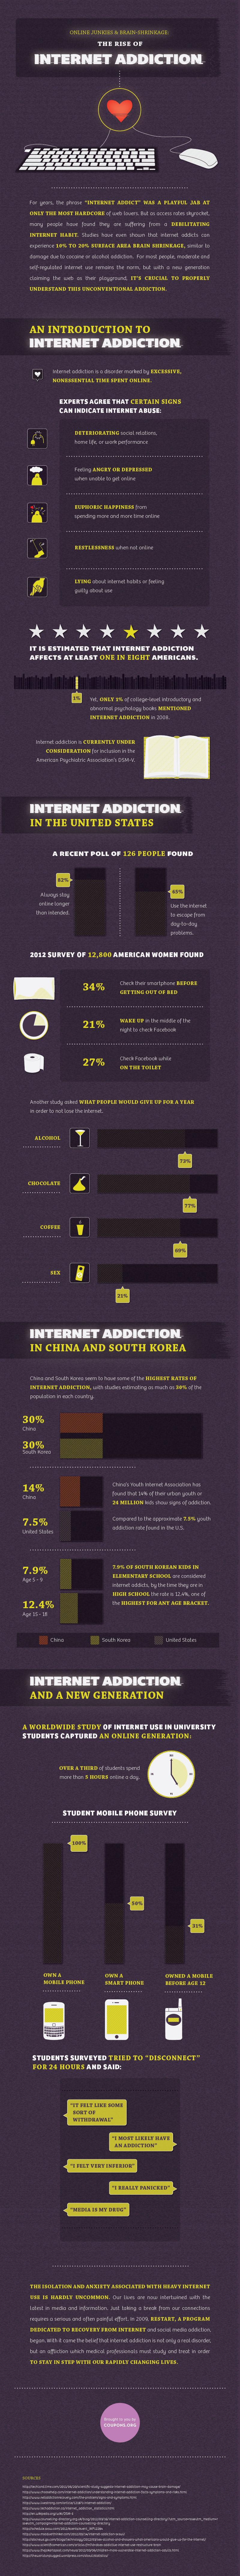 The Rise of Internet Addiction (Infographic)